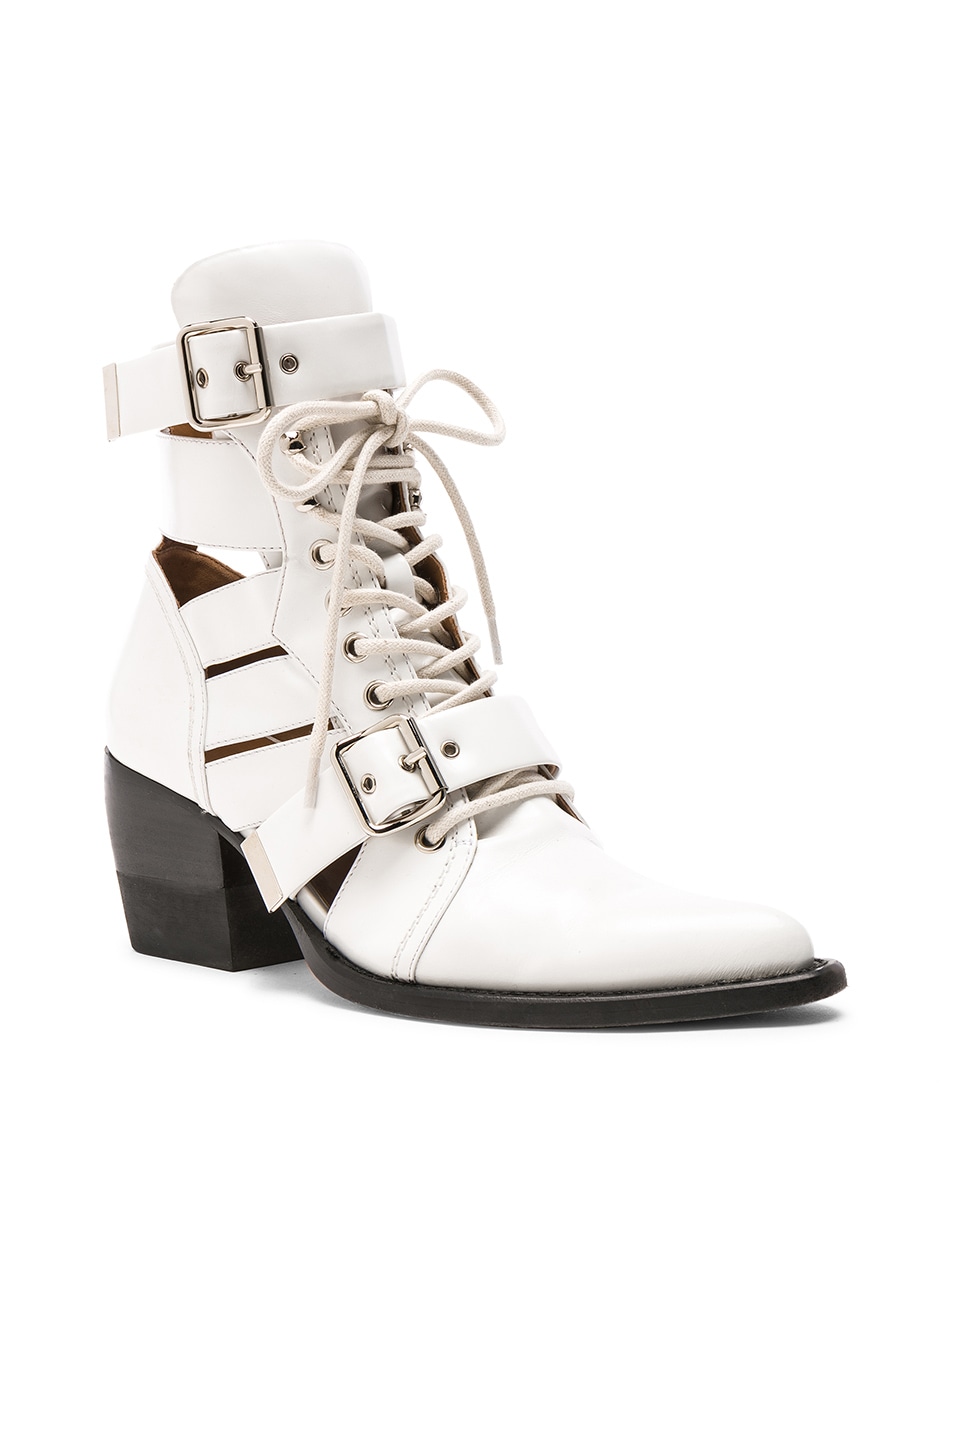 Chloe Leather Rylee Lace Up Buckle Boots in White | FWRD